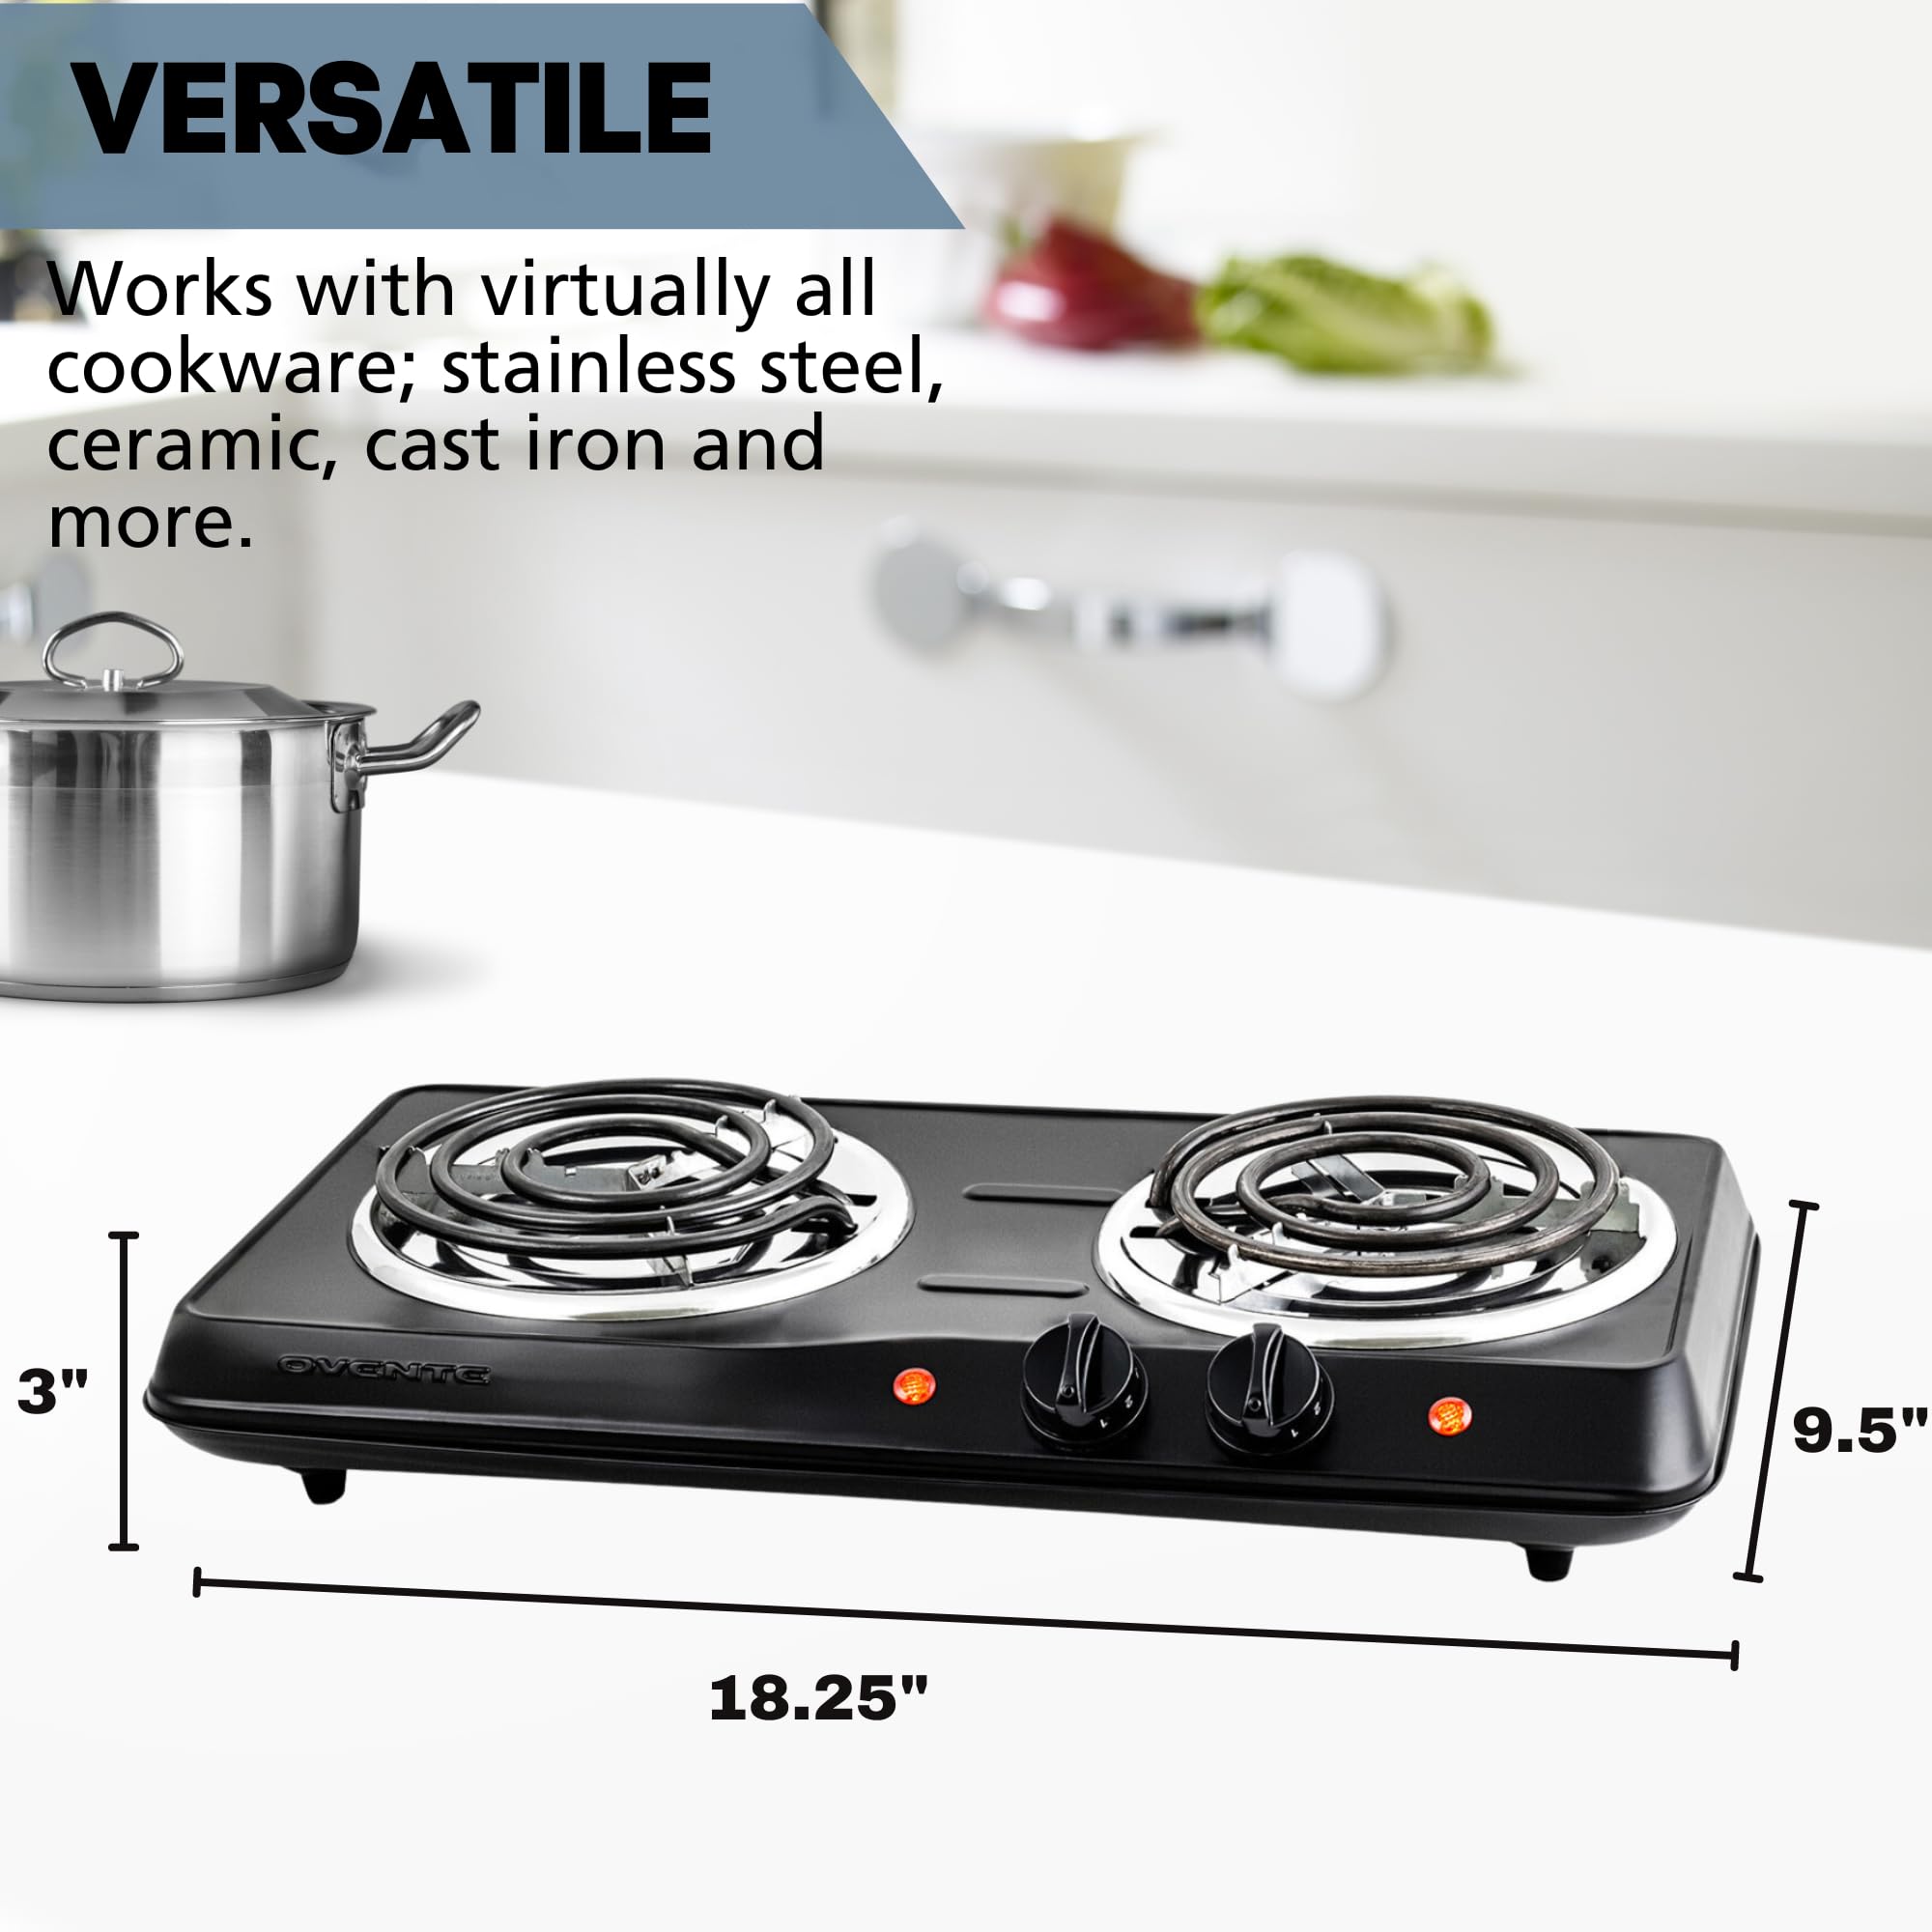 OVENTE Electric Double Coil Burner 6 & 5.75 Inch Hot Plate Cooktop with Temperature Control and Easy to Clean Stainless Steel Base, 1700W Portable Countertop Stove for Home or Dorm, Black BGC102B